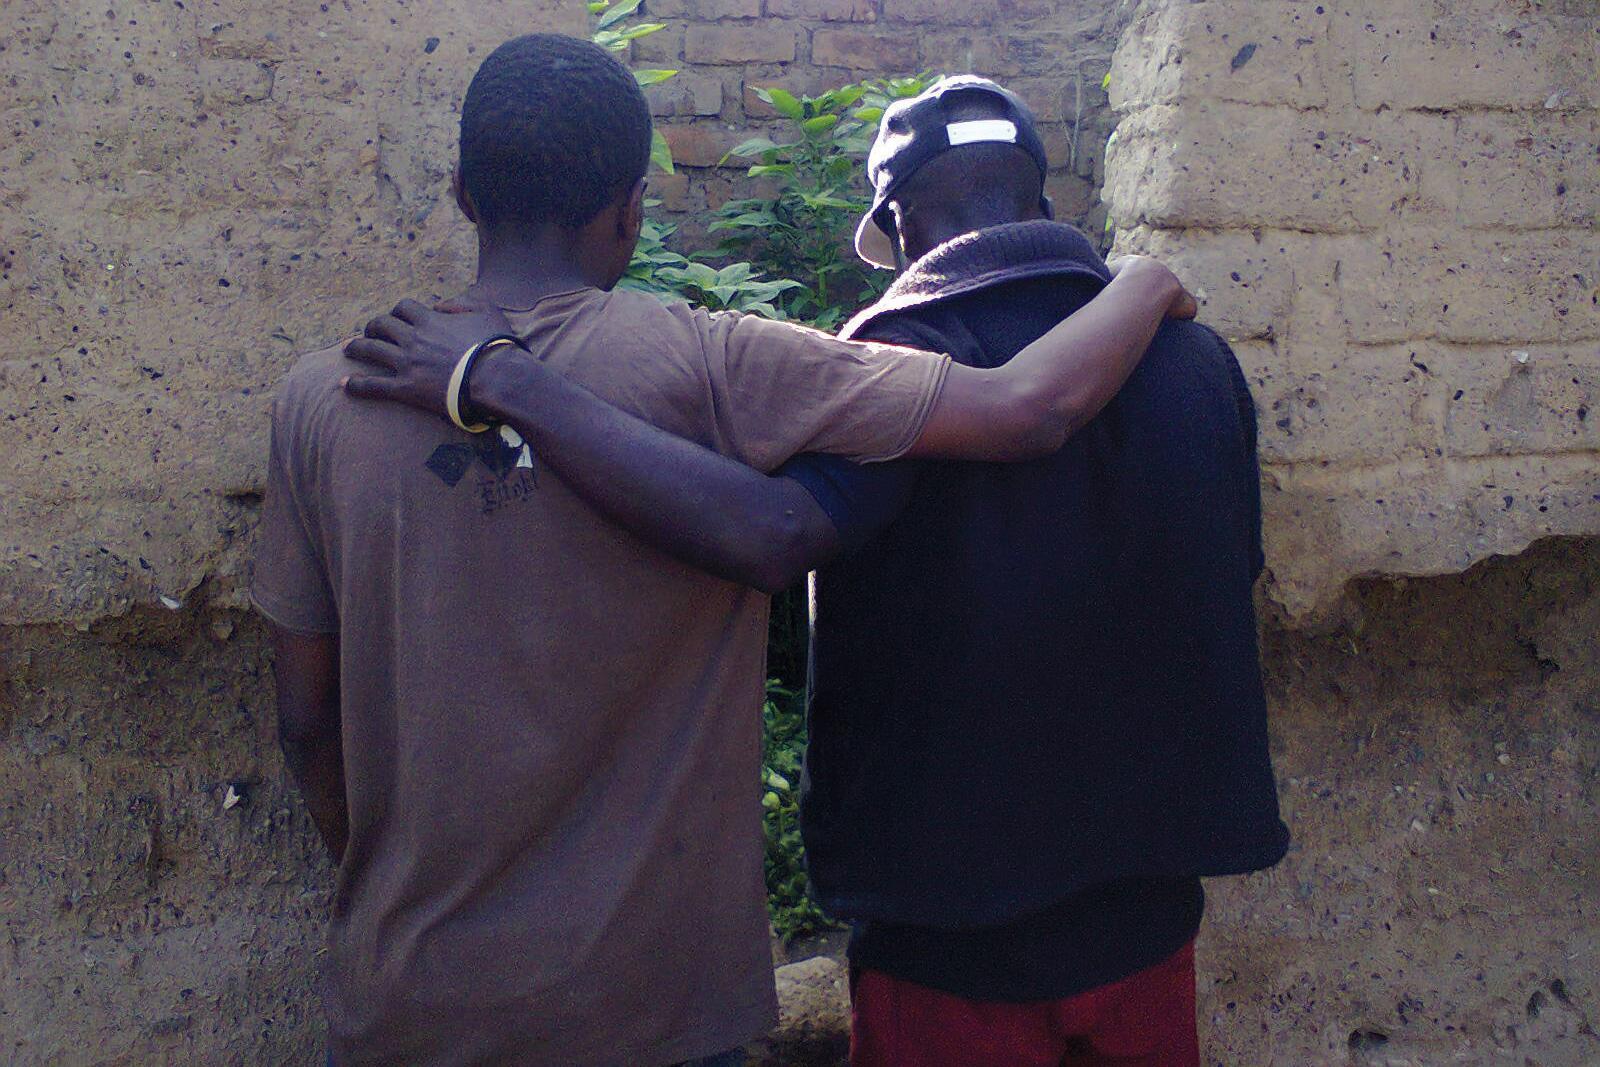 Tanzanian police tortured Musa E., a 22-year-old former heroin user in Mbeya, in 2009, and regularly harass christian B., a 22-year-old-gay man.  Isolated from society, the two men rely on each other for support.